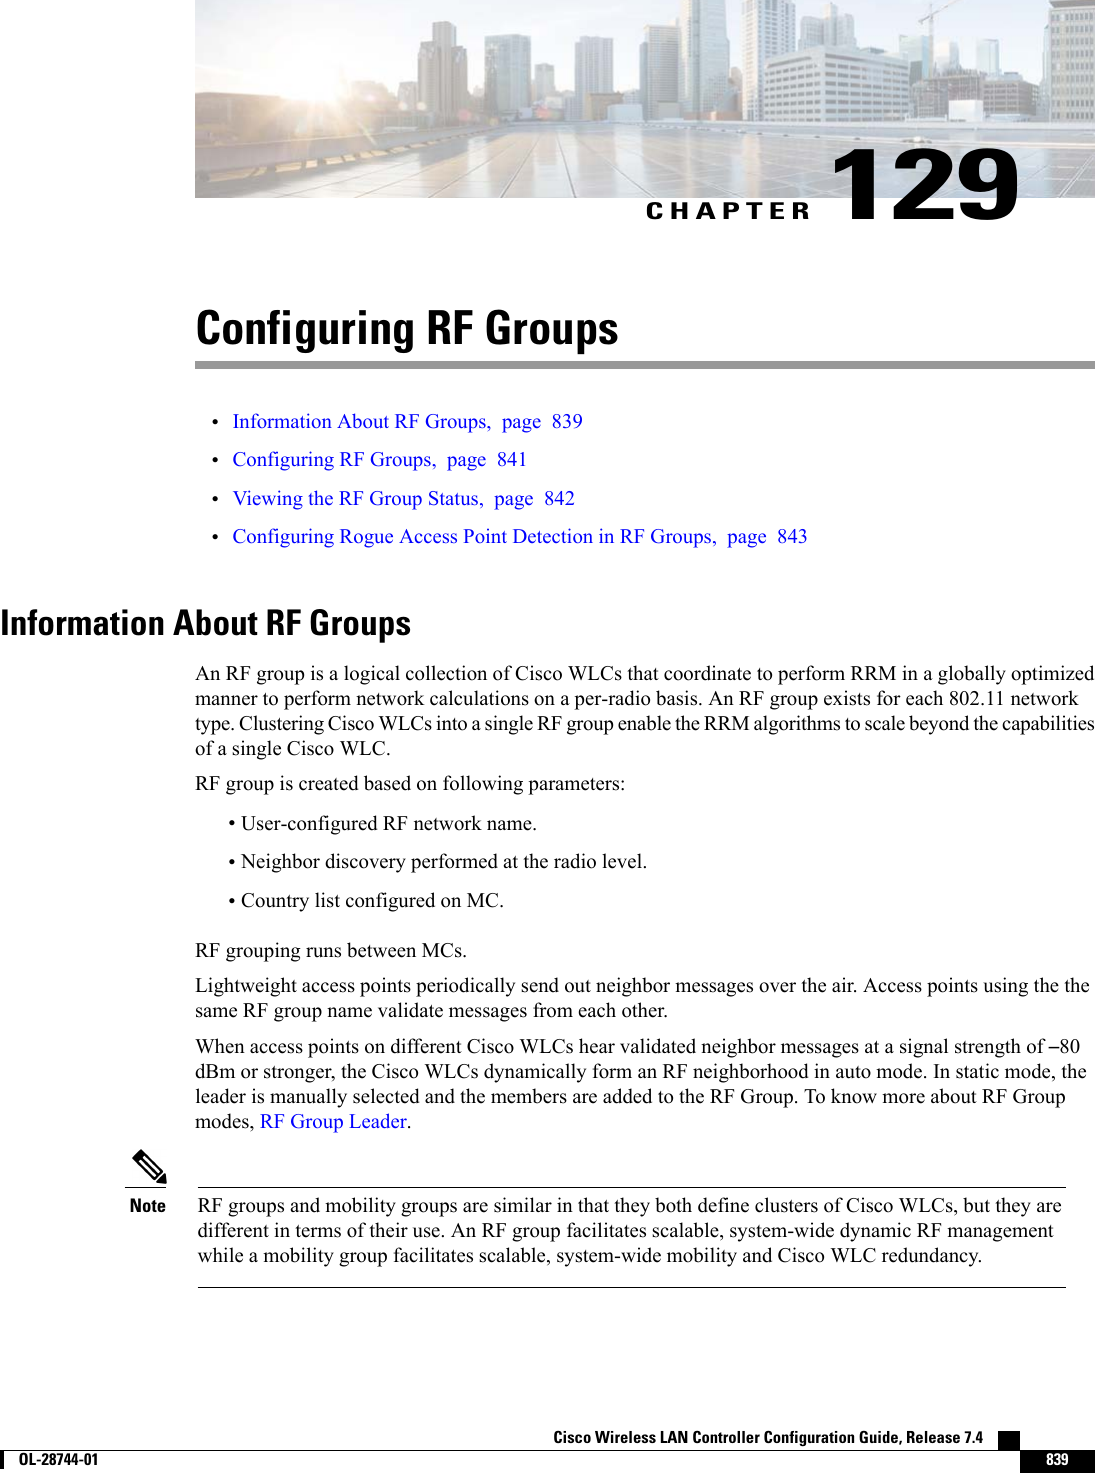 CHAPTER 129Configuring RF Groups•Information About RF Groups, page 839•Configuring RF Groups, page 841•Viewing the RF Group Status, page 842•Configuring Rogue Access Point Detection in RF Groups, page 843Information About RF GroupsAn RF group is a logical collection of Cisco WLCs that coordinate to perform RRM in a globally optimizedmanner to perform network calculations on a per-radio basis. An RF group exists for each 802.11 networktype. Clustering Cisco WLCs into a single RF group enable the RRM algorithms to scale beyond the capabilitiesof a single Cisco WLC.RF group is created based on following parameters:•User-configured RF network name.•Neighbor discovery performed at the radio level.•Country list configured on MC.RF grouping runs between MCs.Lightweight access points periodically send out neighbor messages over the air. Access points using the thesame RF group name validate messages from each other.When access points on different Cisco WLCs hear validated neighbor messages at a signal strength of –80dBm or stronger, the Cisco WLCs dynamically form an RF neighborhood in auto mode. In static mode, theleader is manually selected and the members are added to the RF Group. To know more about RF Groupmodes, RF Group Leader.RF groups and mobility groups are similar in that they both define clusters of Cisco WLCs, but they aredifferent in terms of their use. An RF group facilitates scalable, system-wide dynamic RF managementwhile a mobility group facilitates scalable, system-wide mobility and Cisco WLC redundancy.NoteCisco Wireless LAN Controller Configuration Guide, Release 7.4        OL-28744-01 839